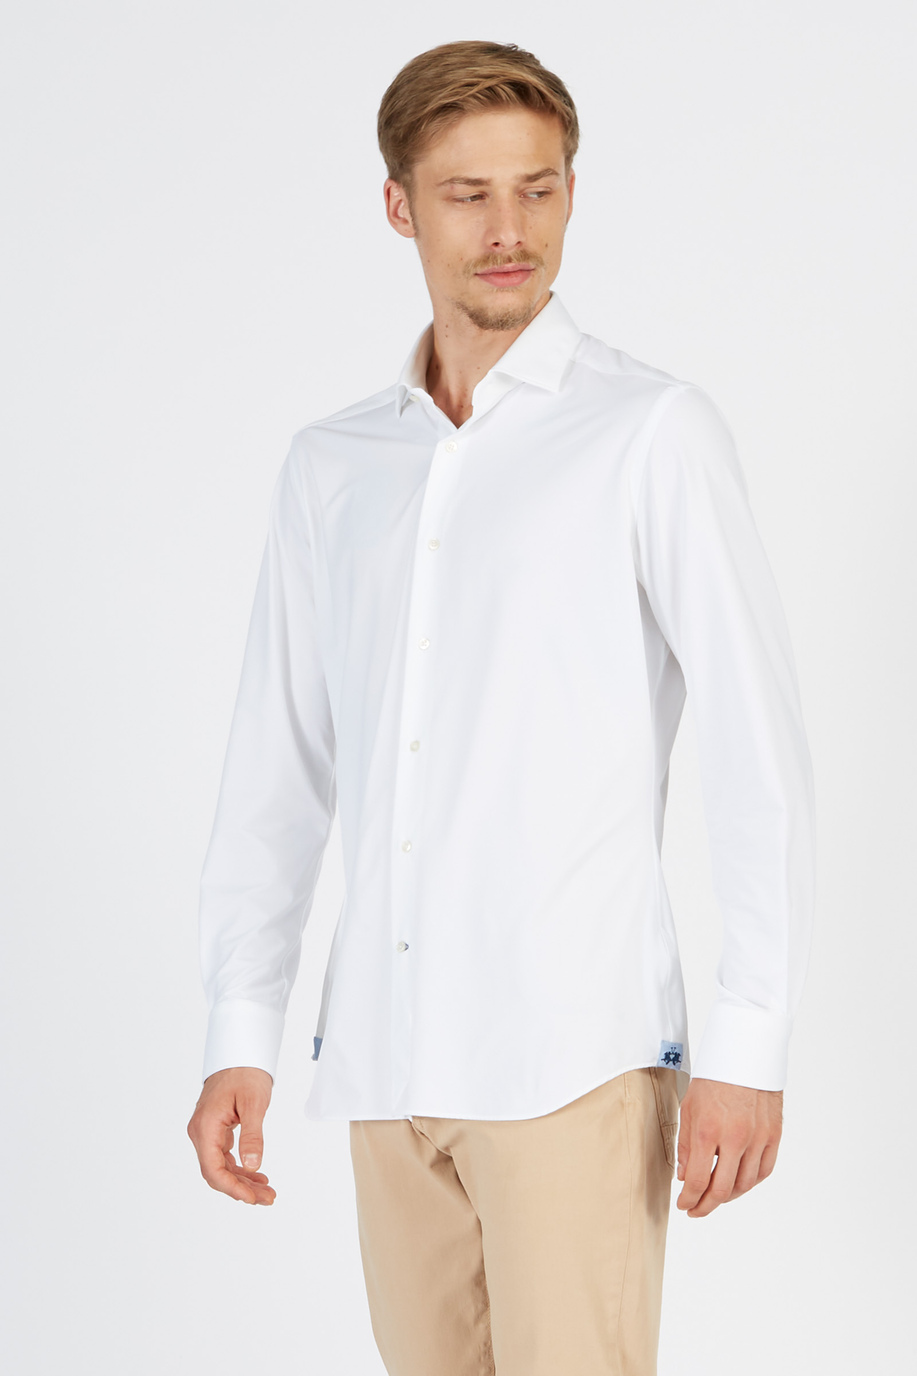 Men's long-sleeved synthetic fabric shirt - Essential | La Martina - Official Online Shop